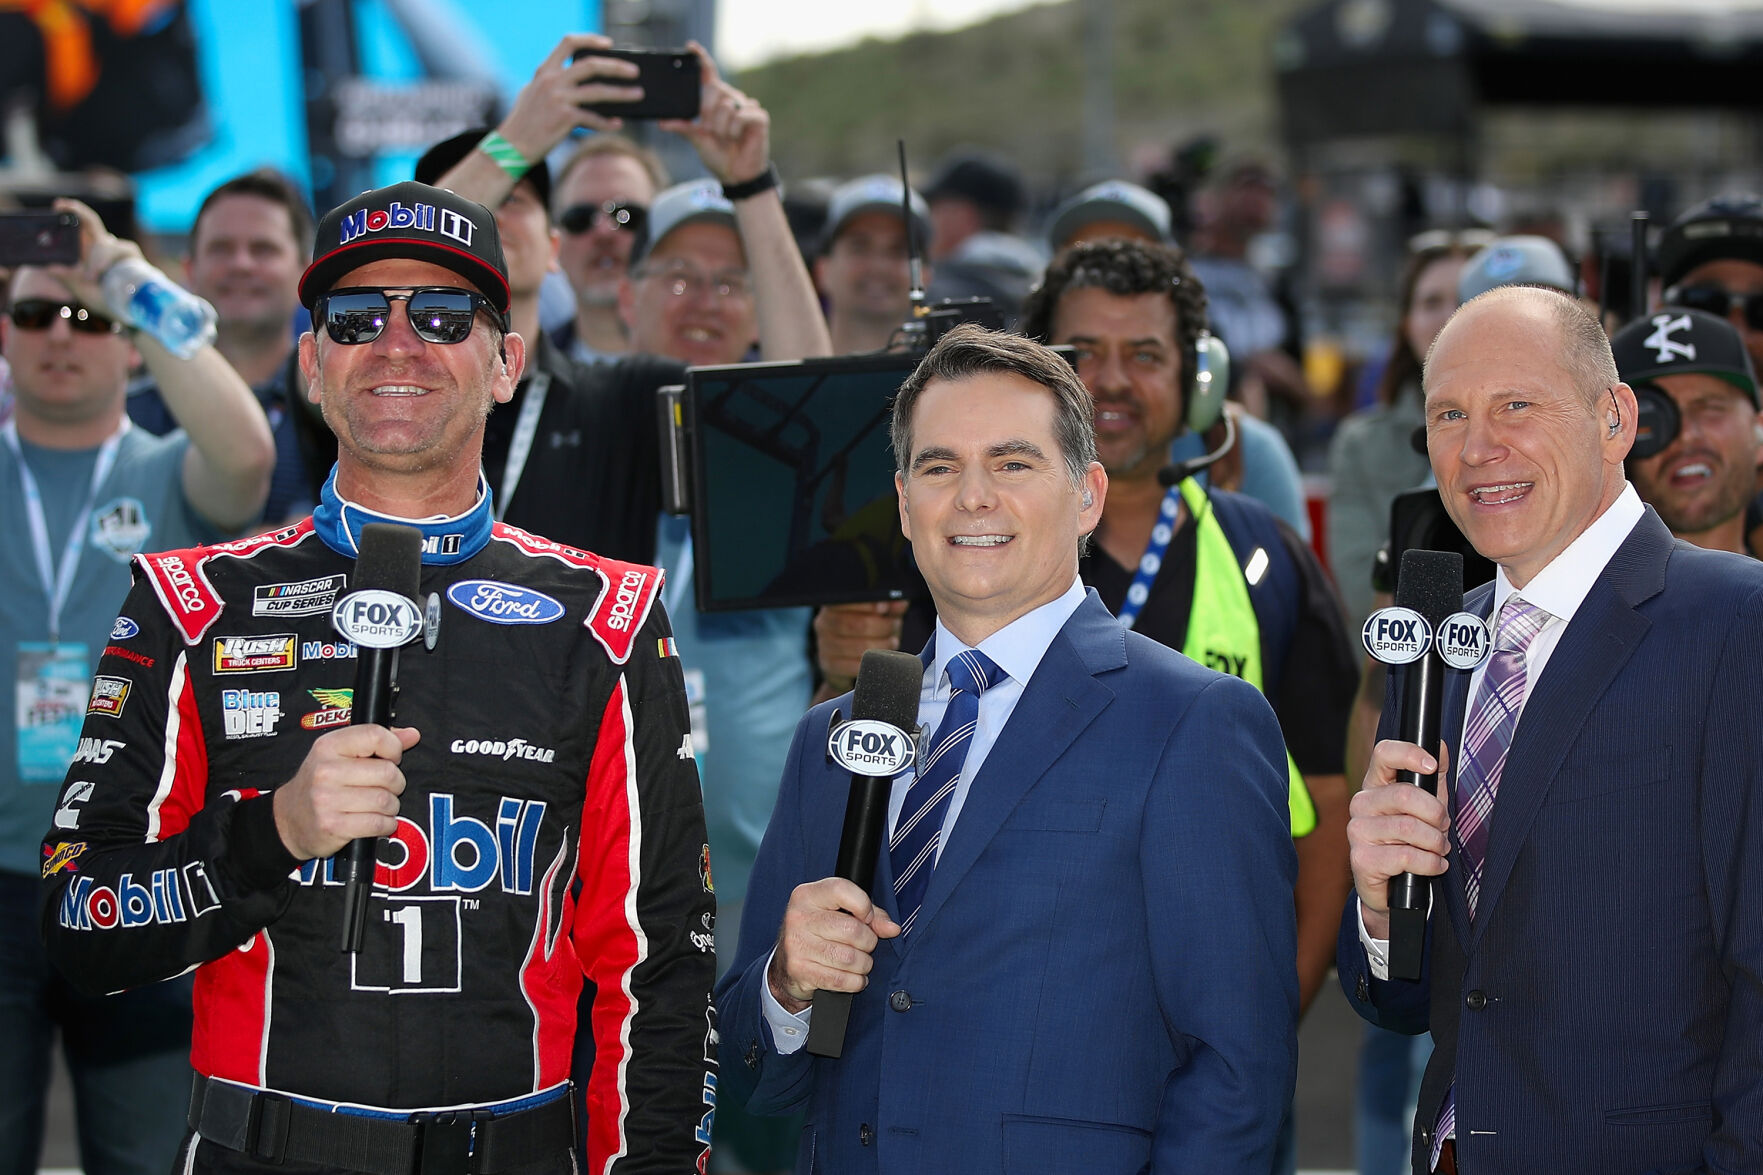 Gordon leaving Fox for new role with Hendrick Motorsports